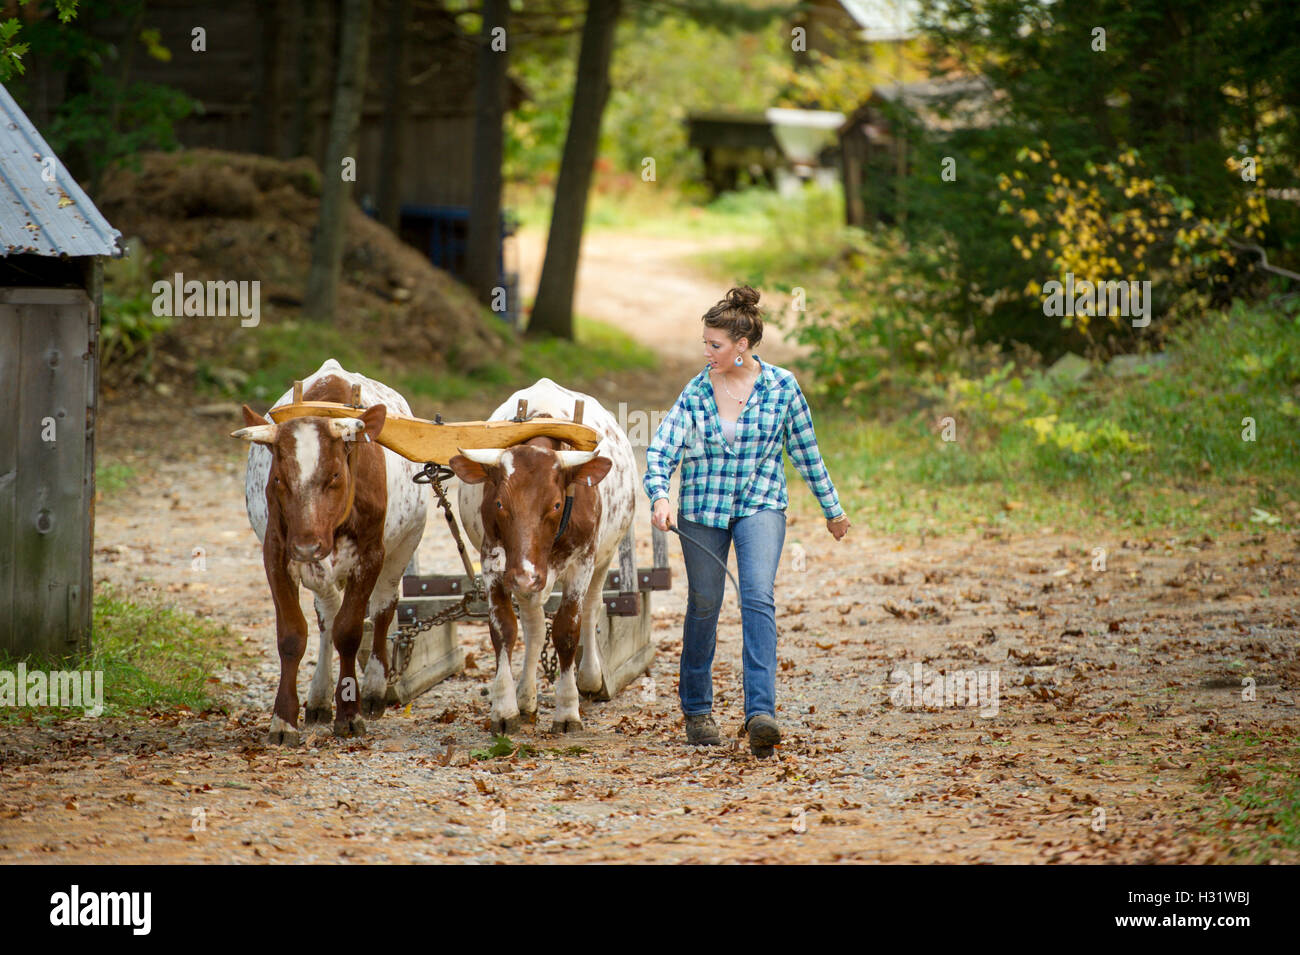 Woman with two oxen connected by a yoke pulling farming equipment in Gorham, Maine. Stock Photo